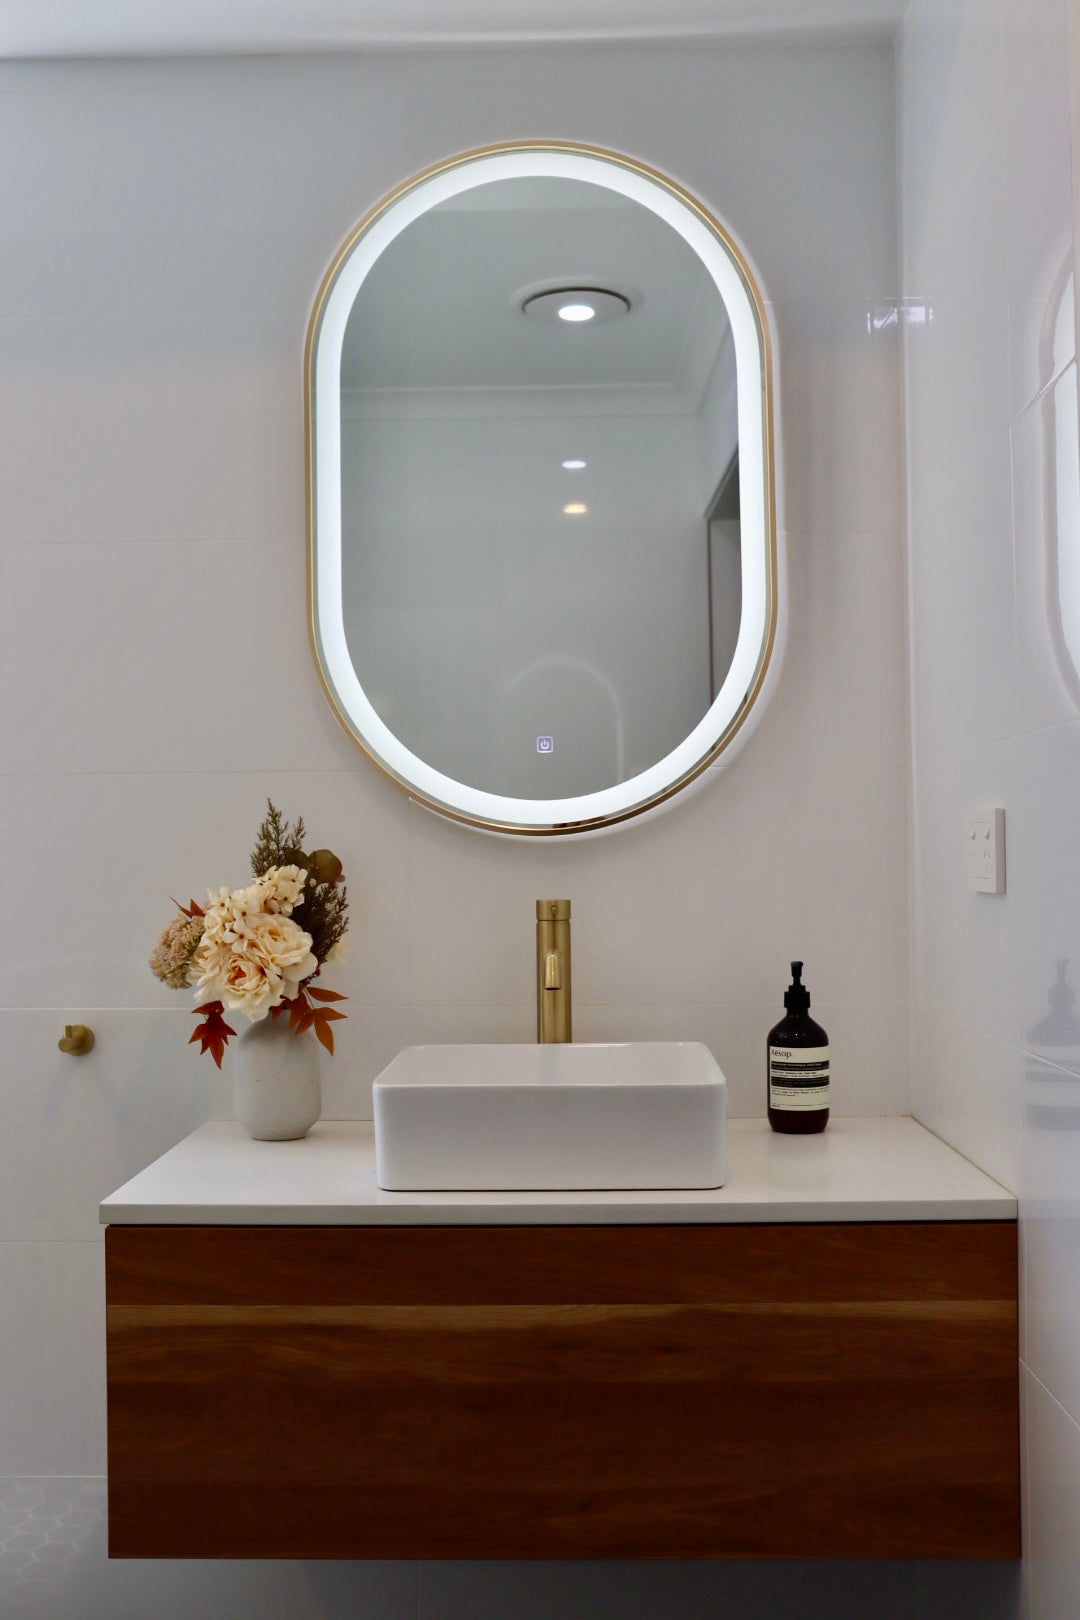 Pill-shaped LED Mirror with Silver Frame Above Floating Brown Vanity Cabinet in White Bathroom